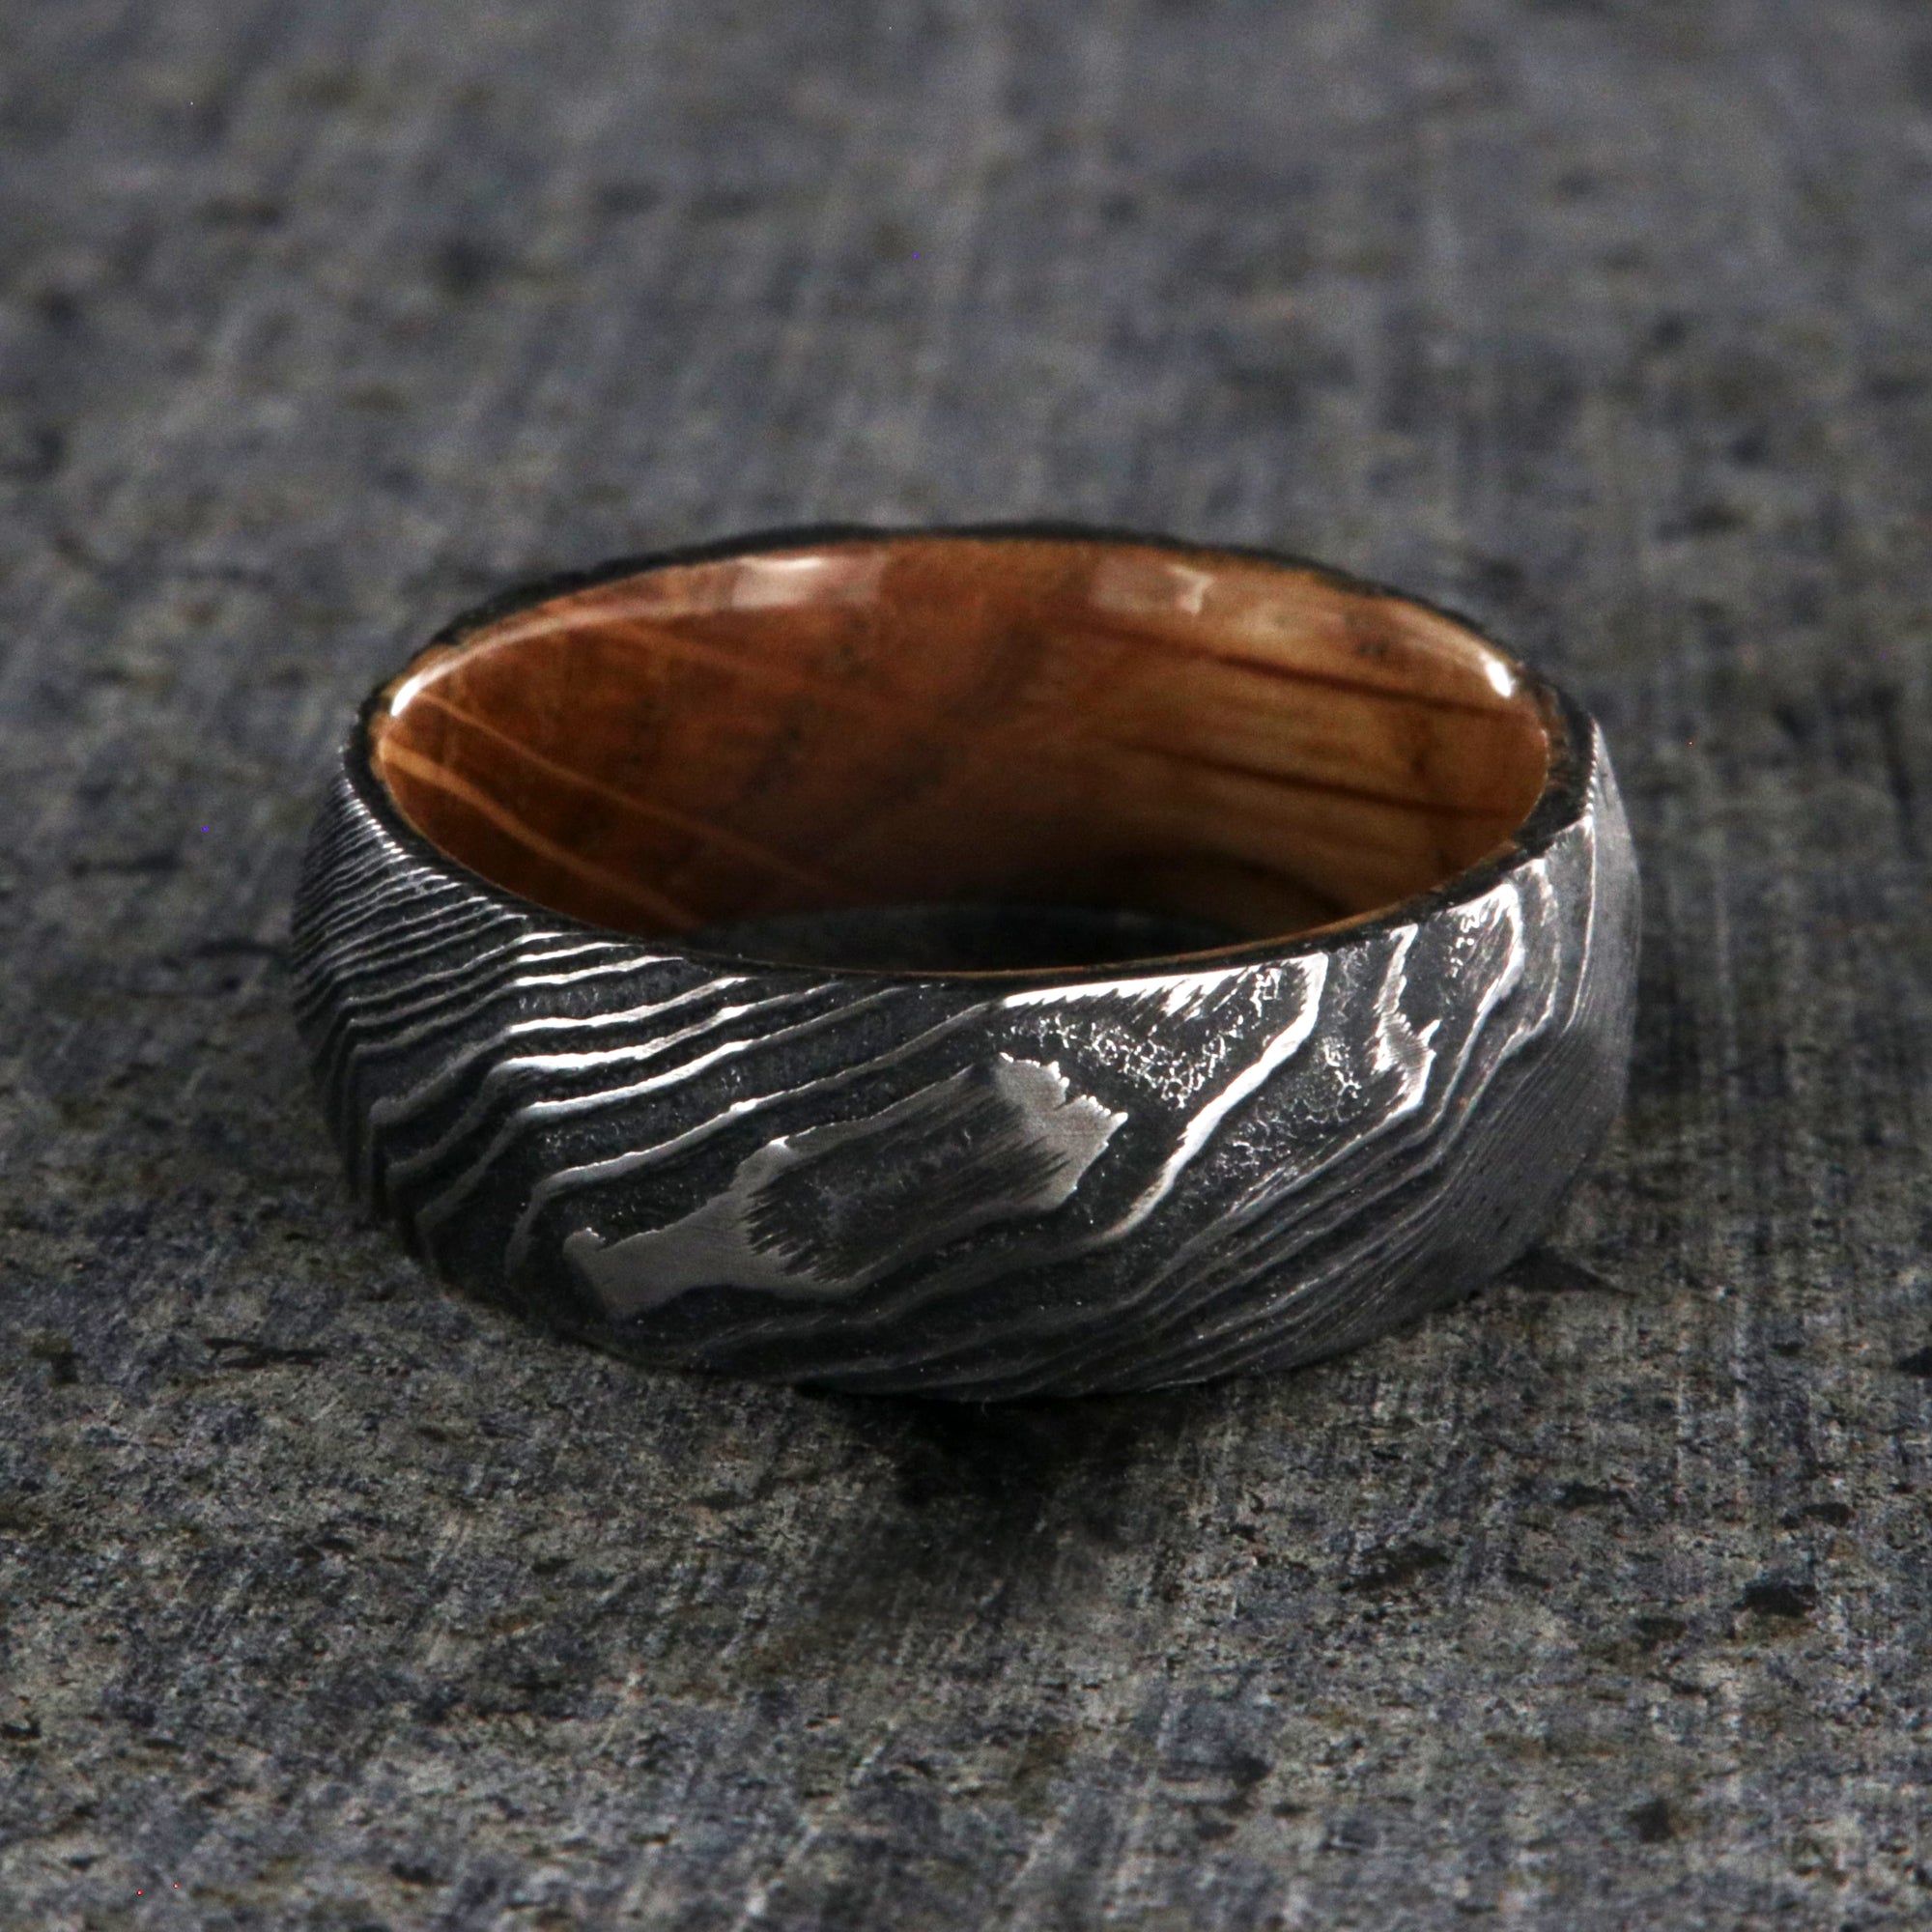 8mm wide big hammered texture on a Damascus steel wedding ring with a whiskey barrel sleeve